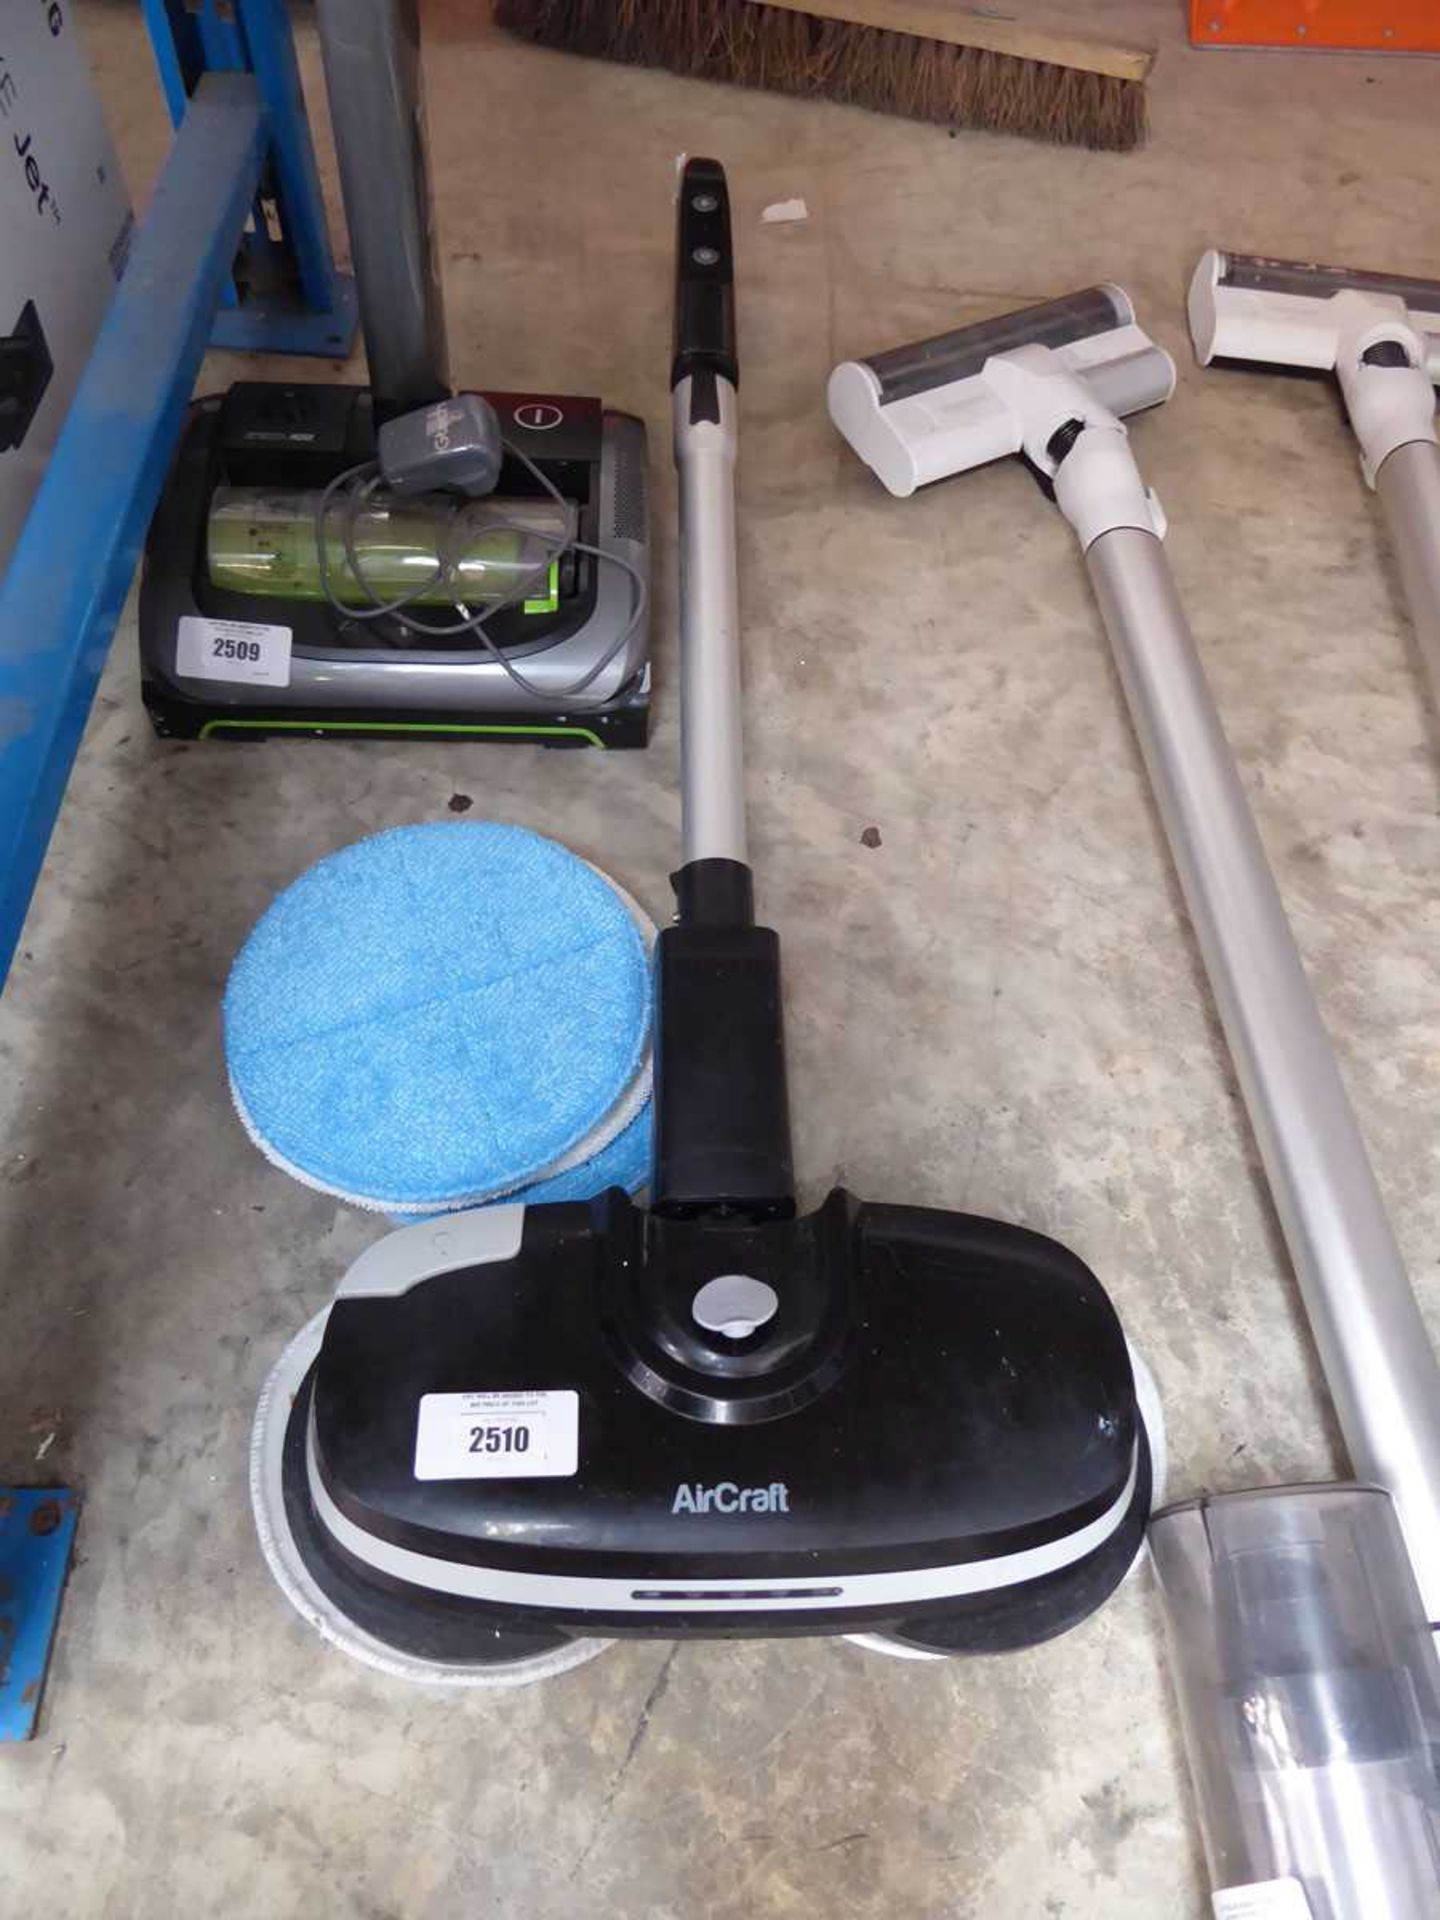 +VAT AirCraft cordless hard floor cleaner with associated pads (no charger or battery)